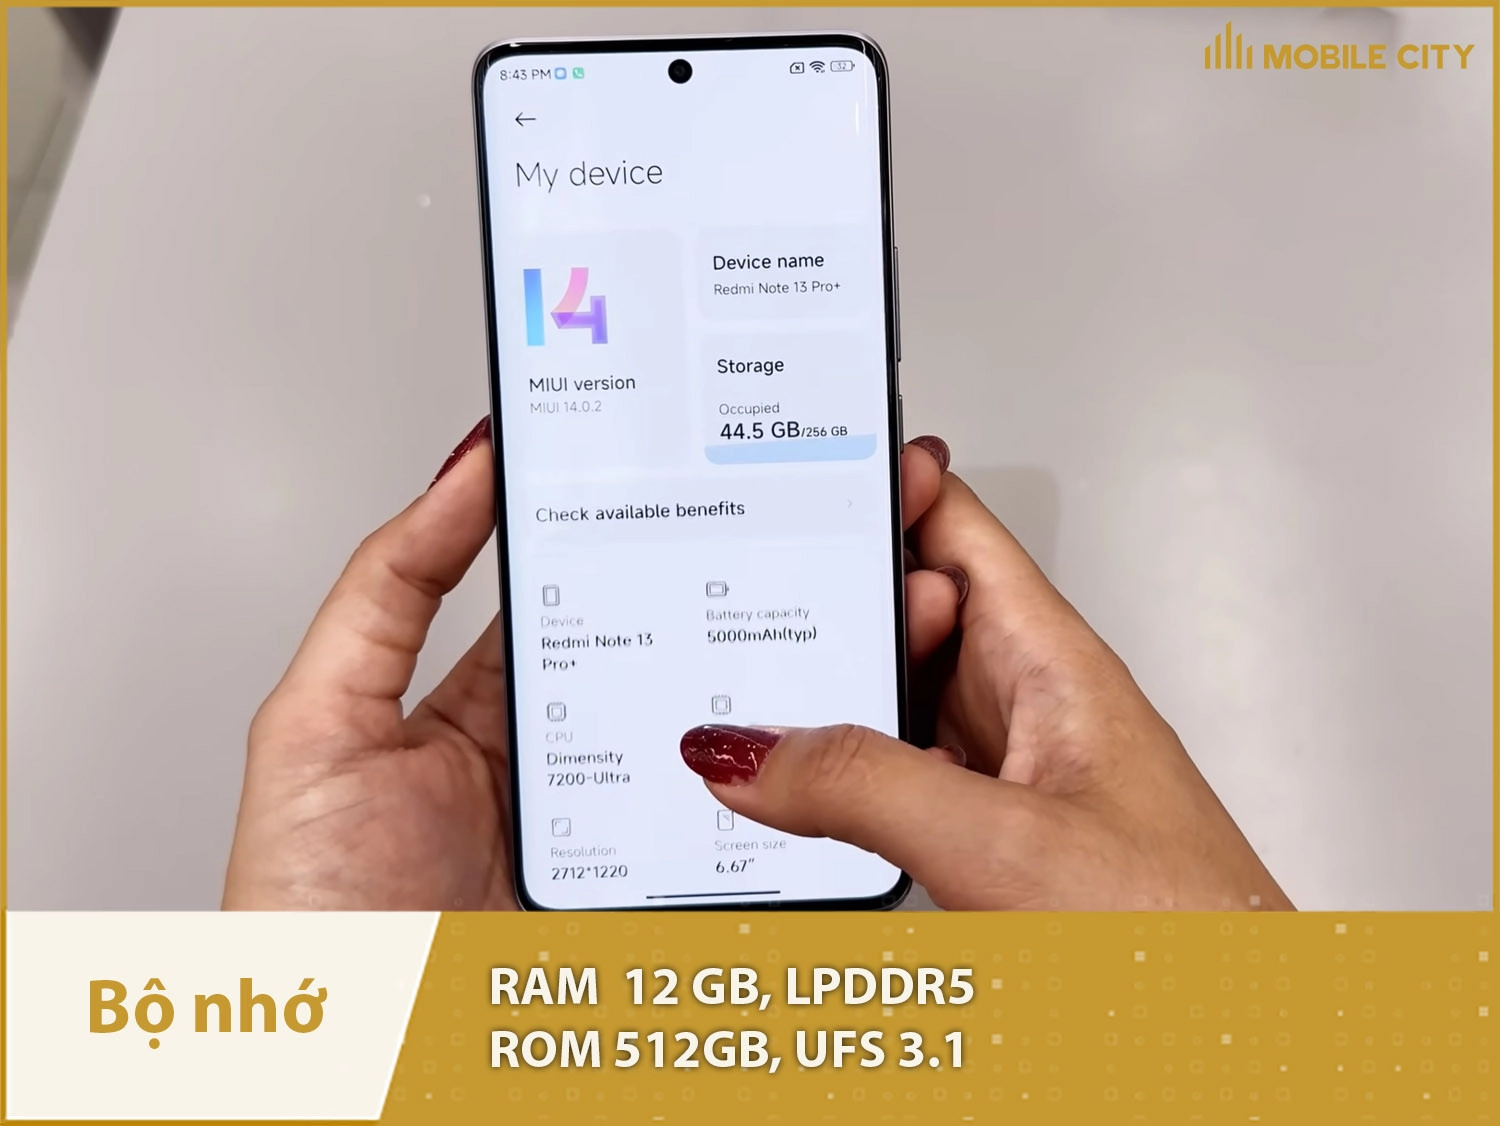 Redmi Note 13 Pro Plus Aape Limited Edition